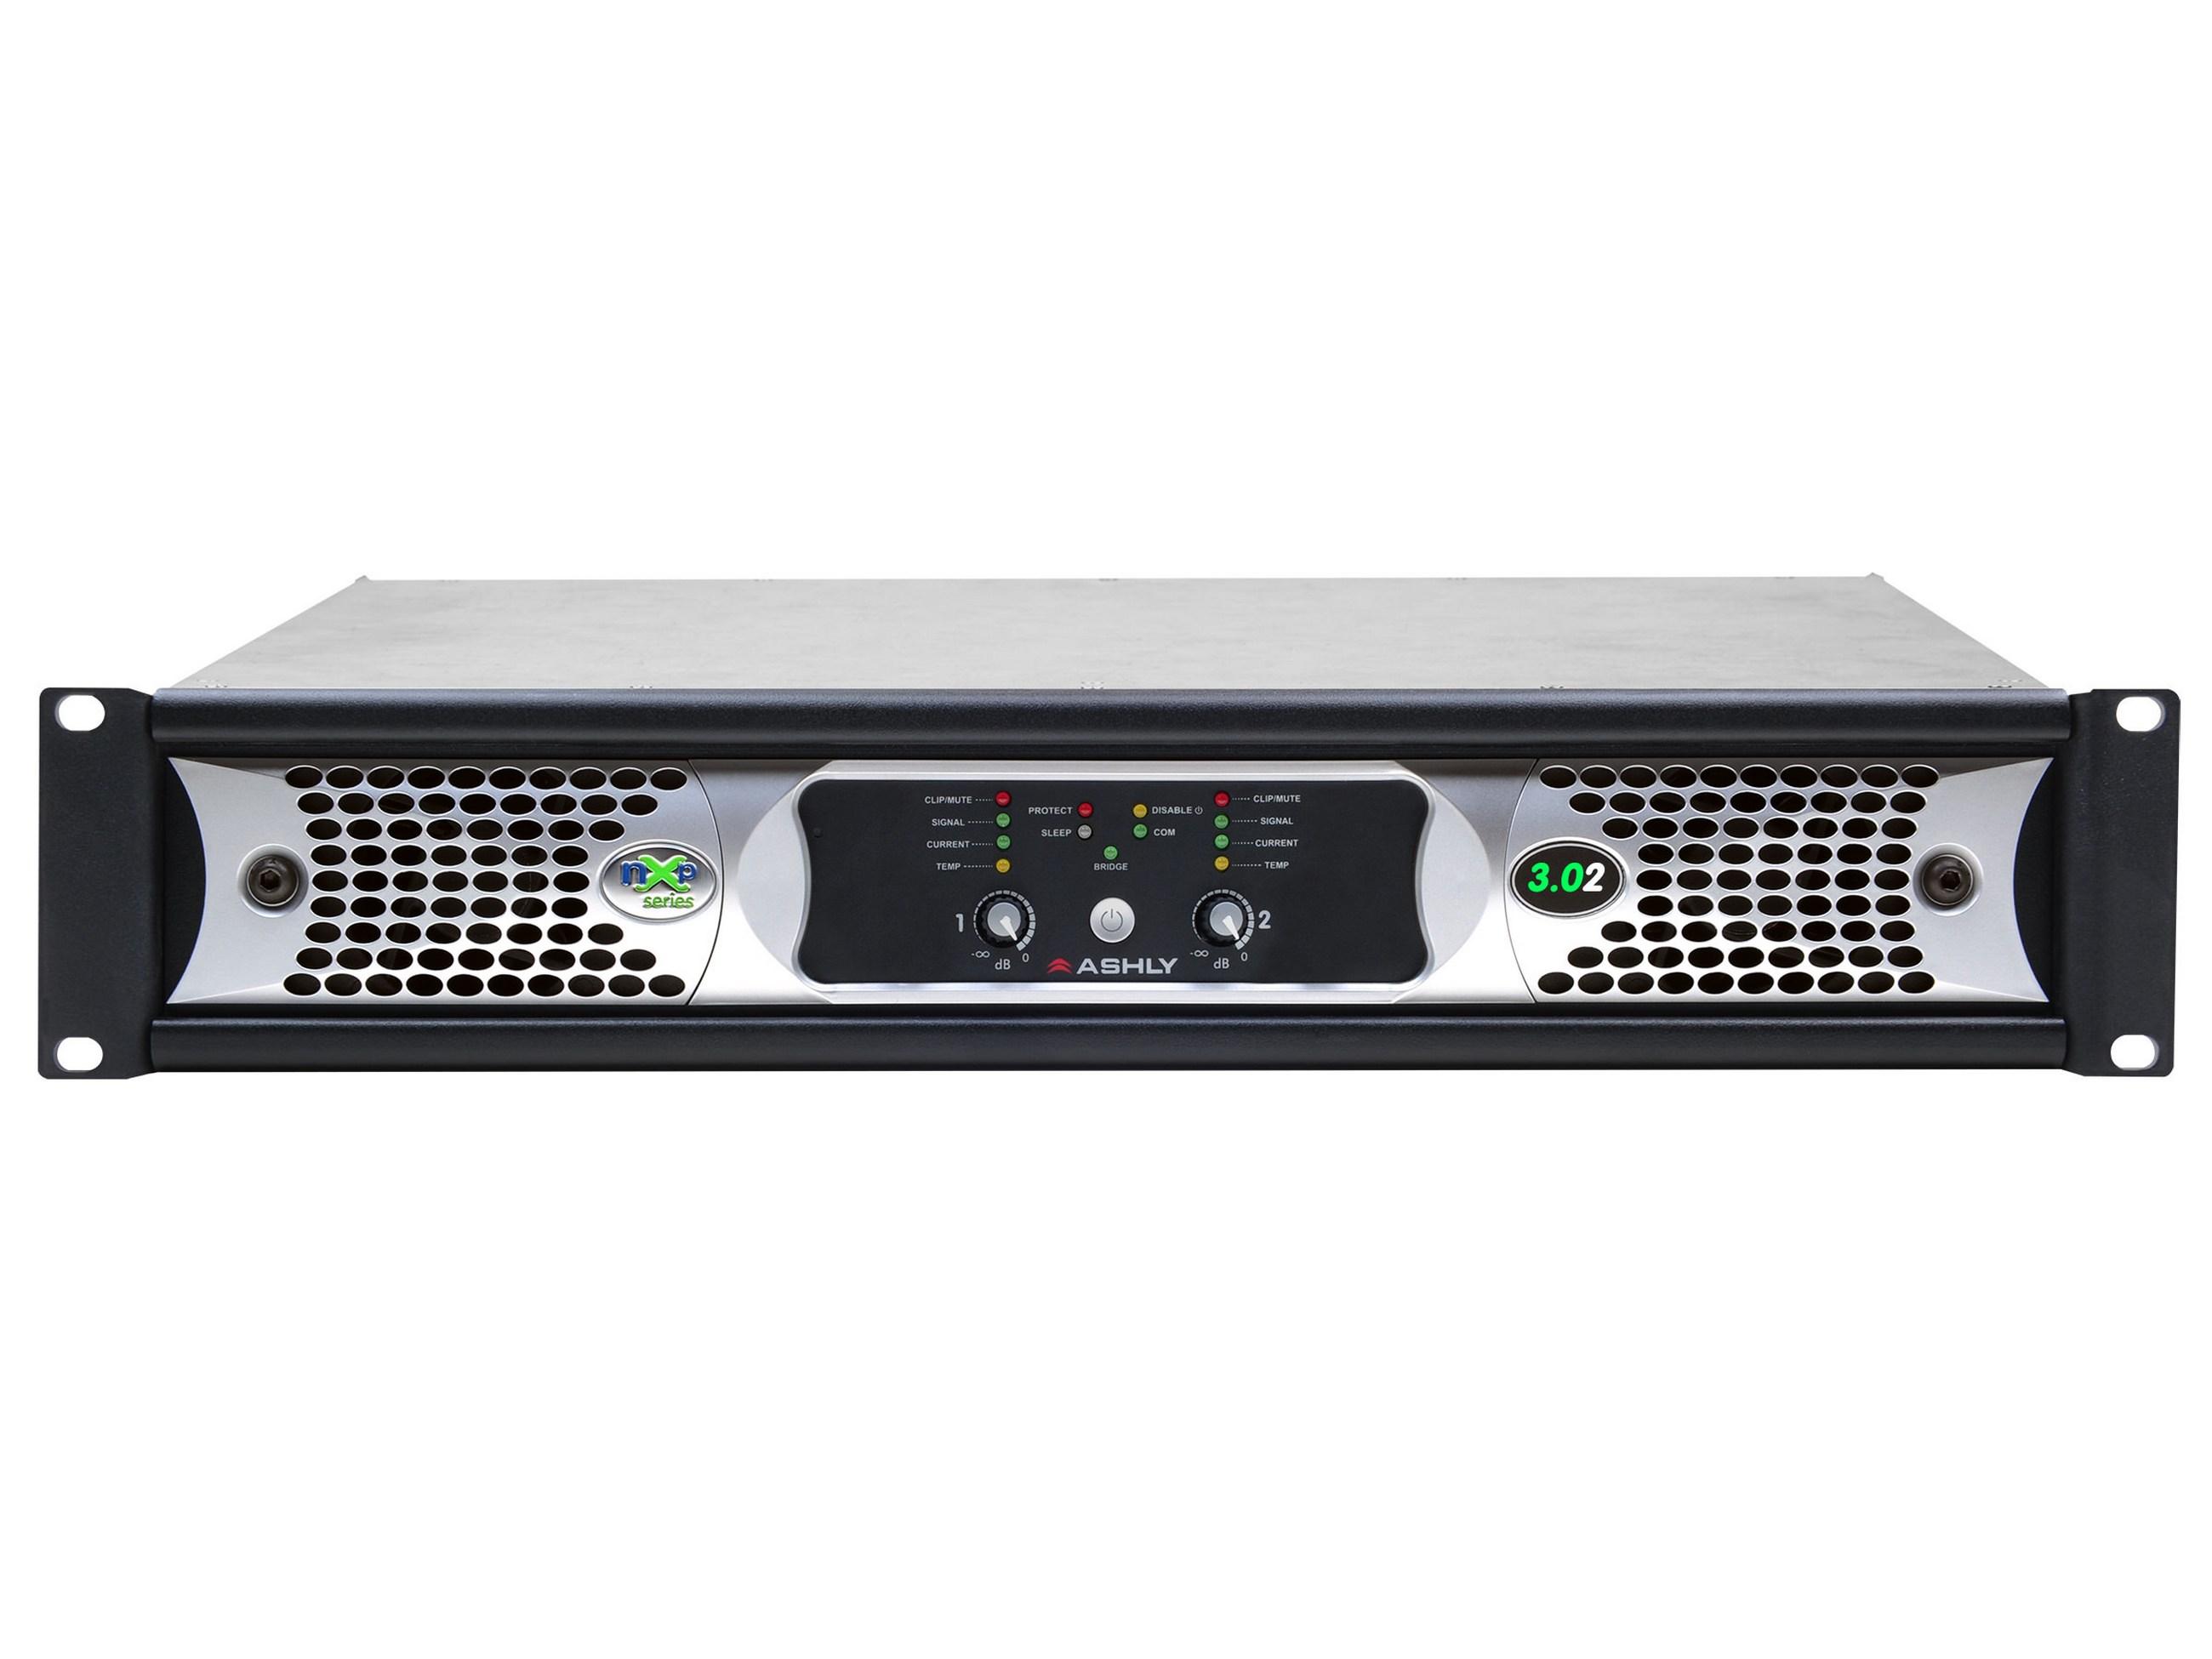 nXp3.02d 2x 3000 Watts/2 Ohms Network Power Amplifier with Protea DSP and OPDante Option Card by Ashly